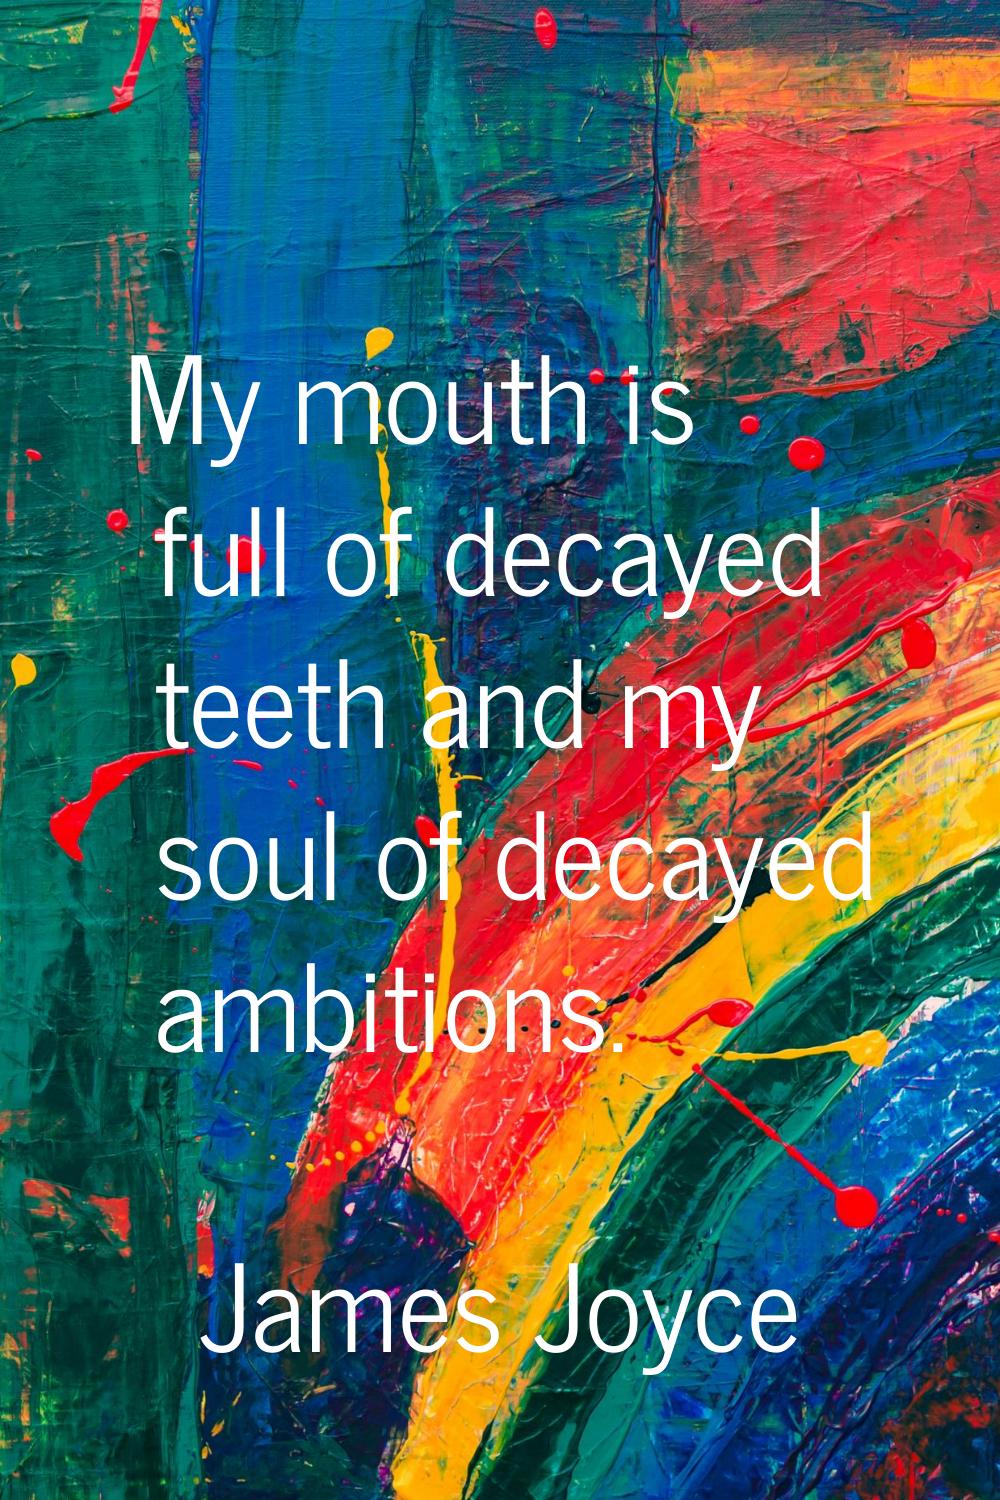 My mouth is full of decayed teeth and my soul of decayed ambitions.